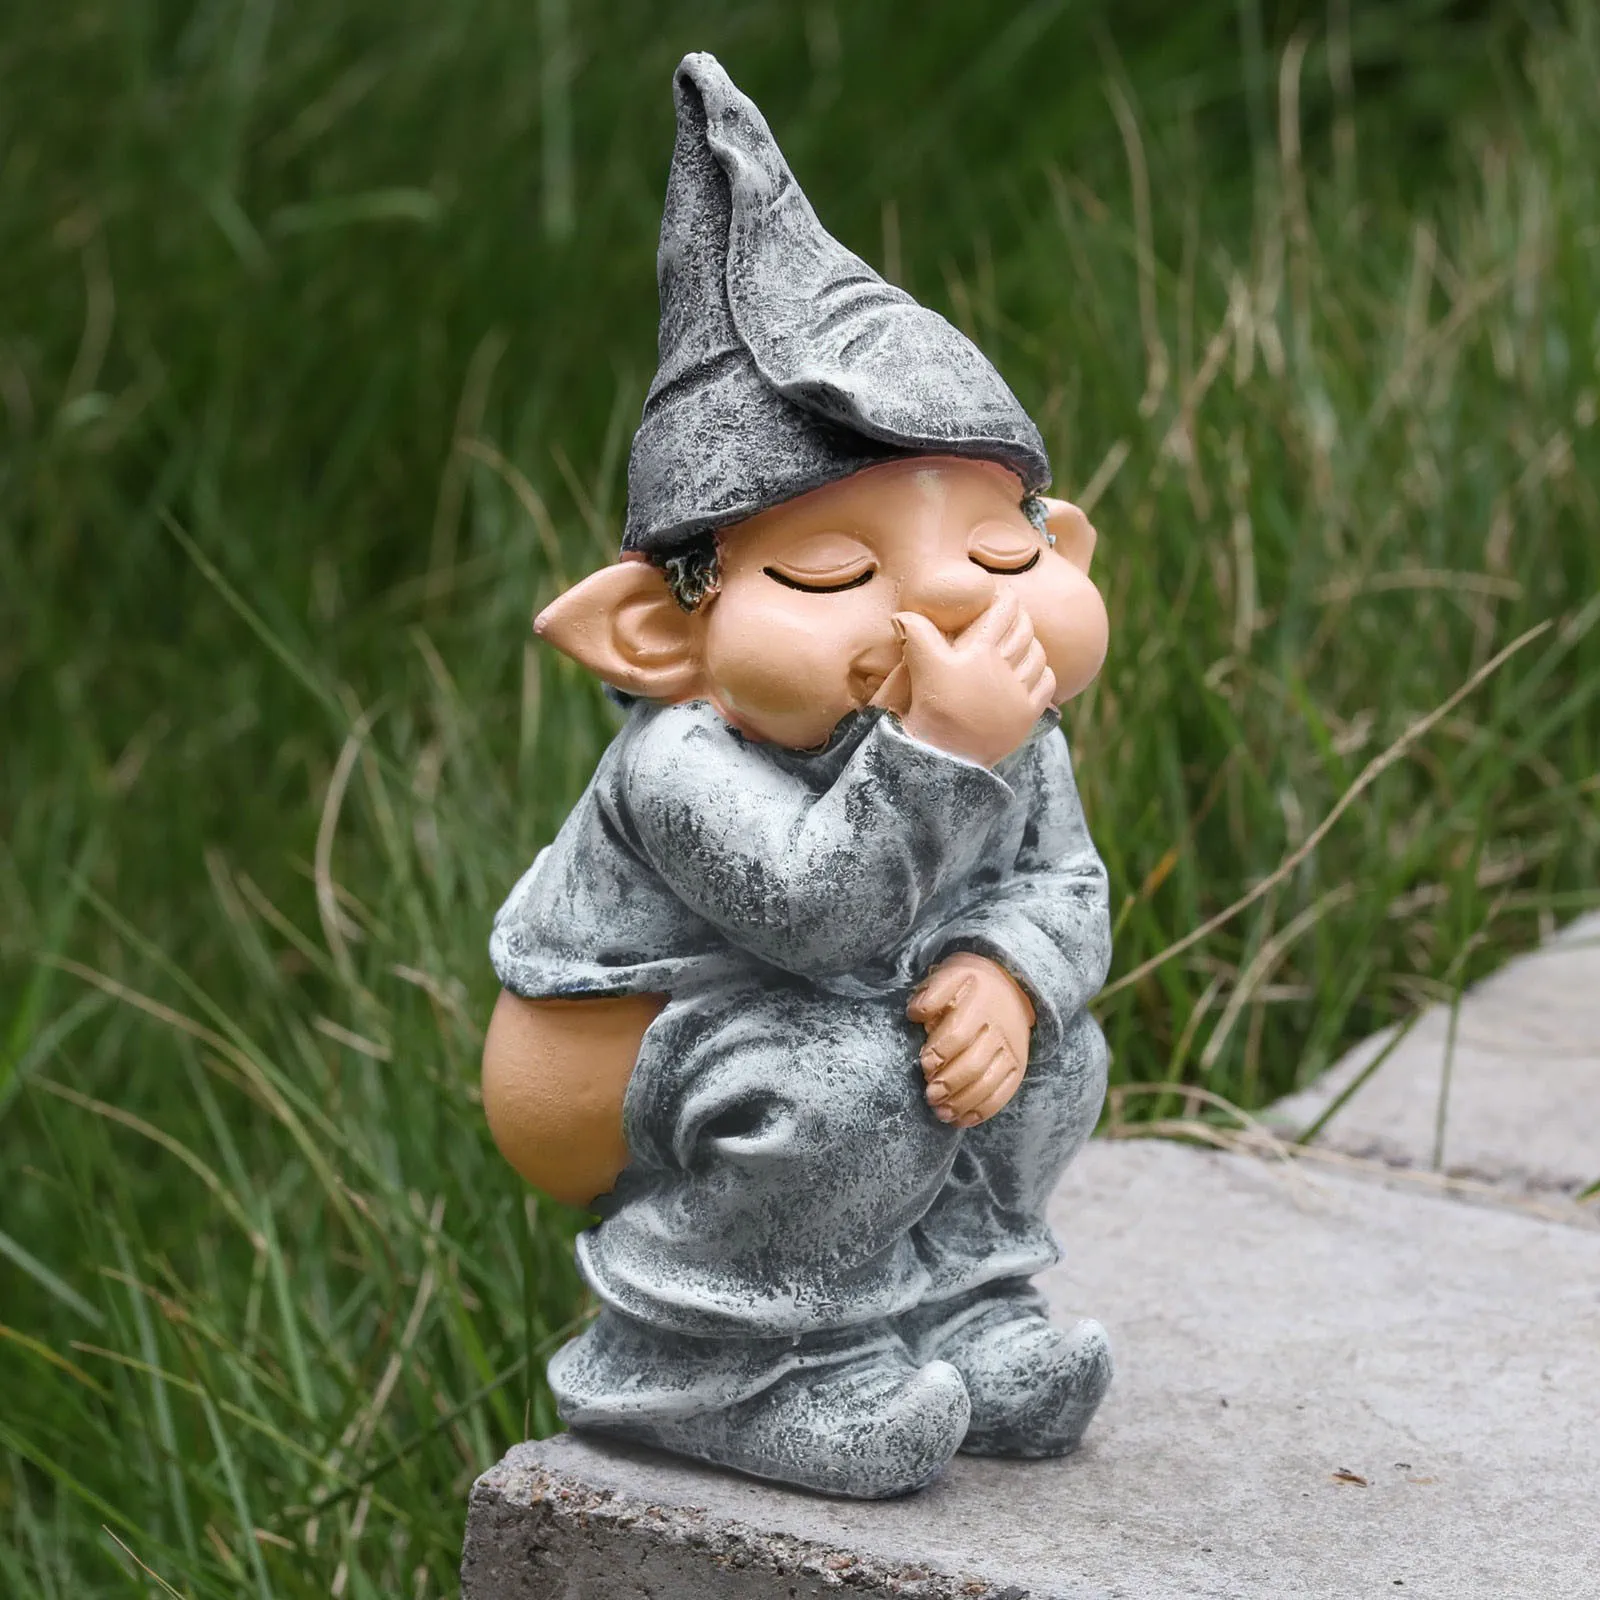 

Creative Zombie Gnome Garden Statues Outdoor Gardening Hurted Dwarf Ornaments Dwarf Yard Funny Home Sculptures Crafts Decoartion